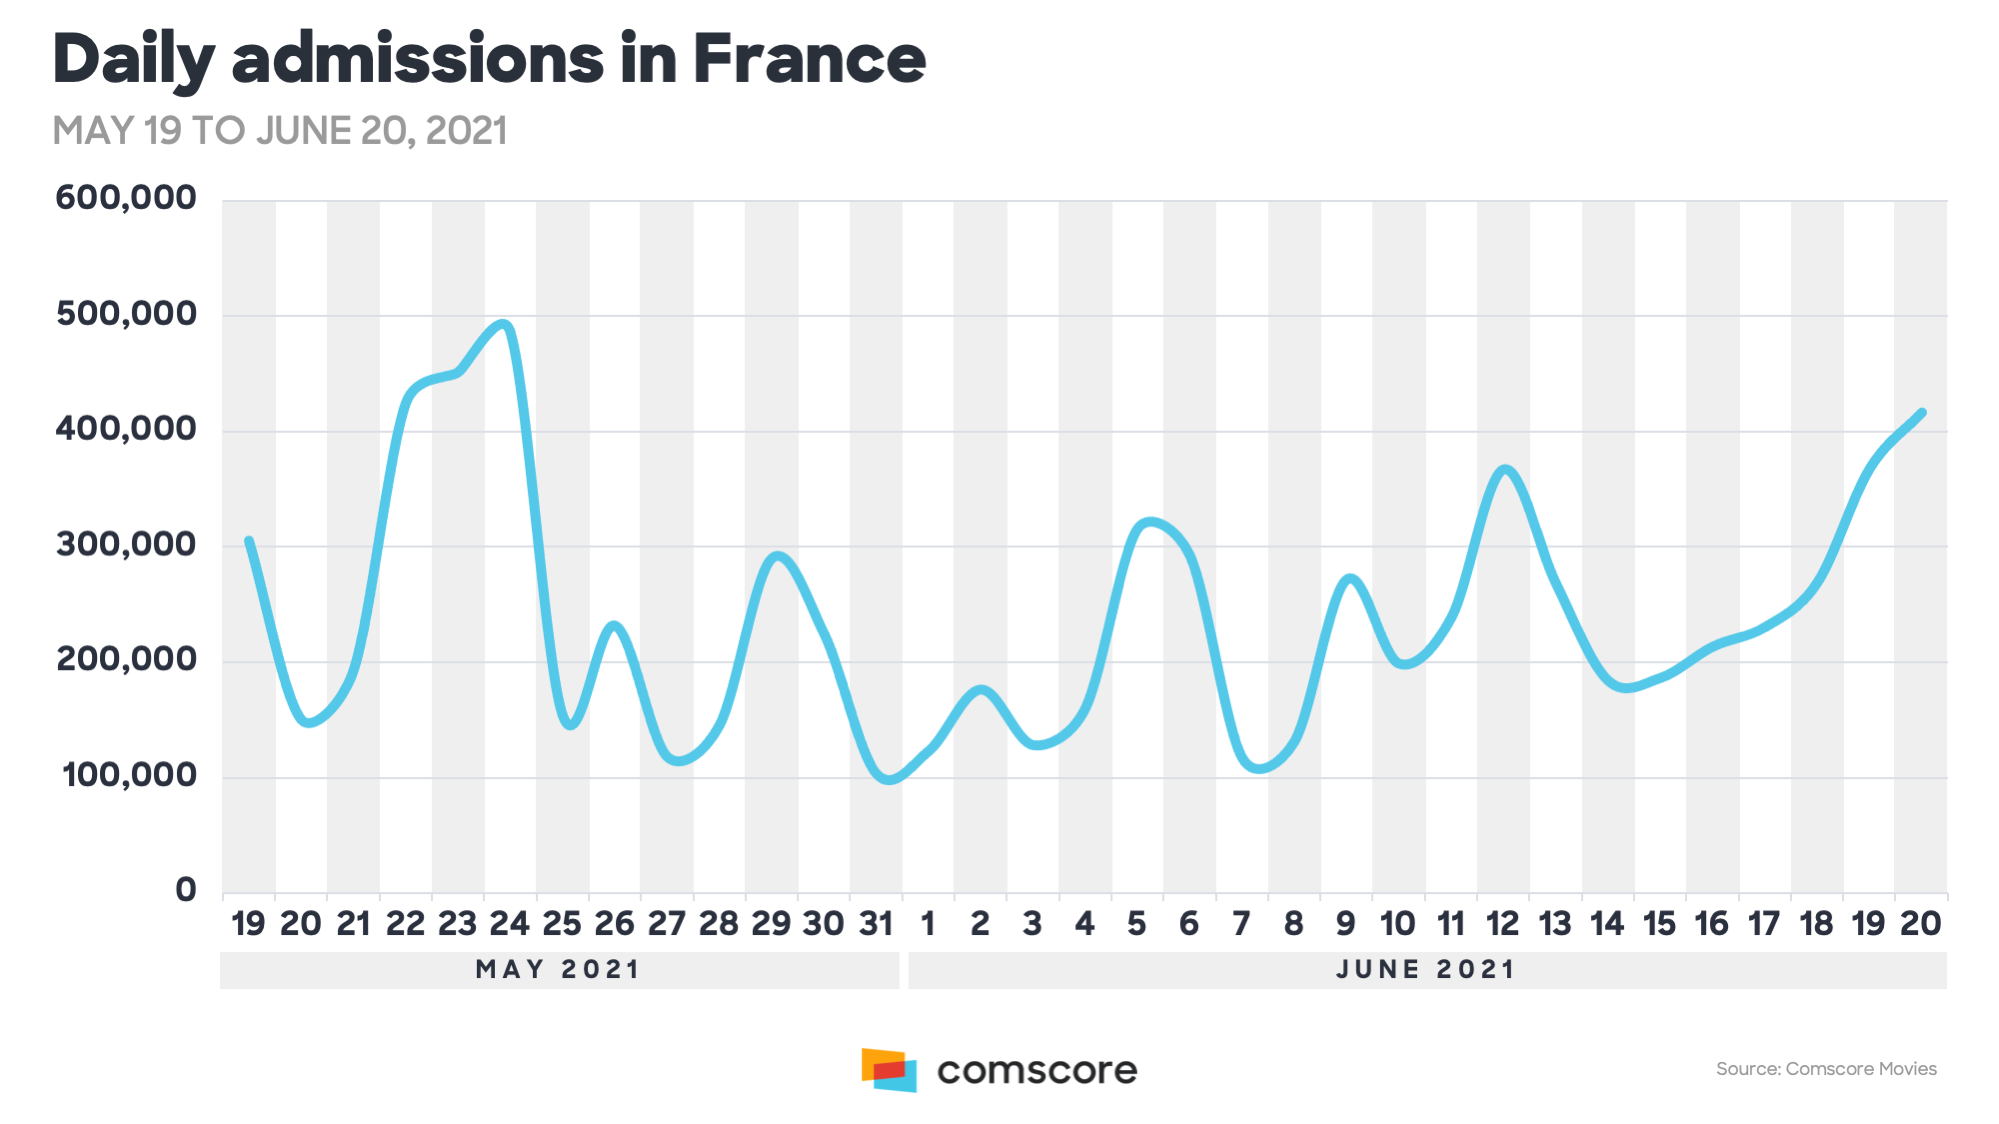 Comscore Announces Spectacular Box Office Recovery in France | DFD News